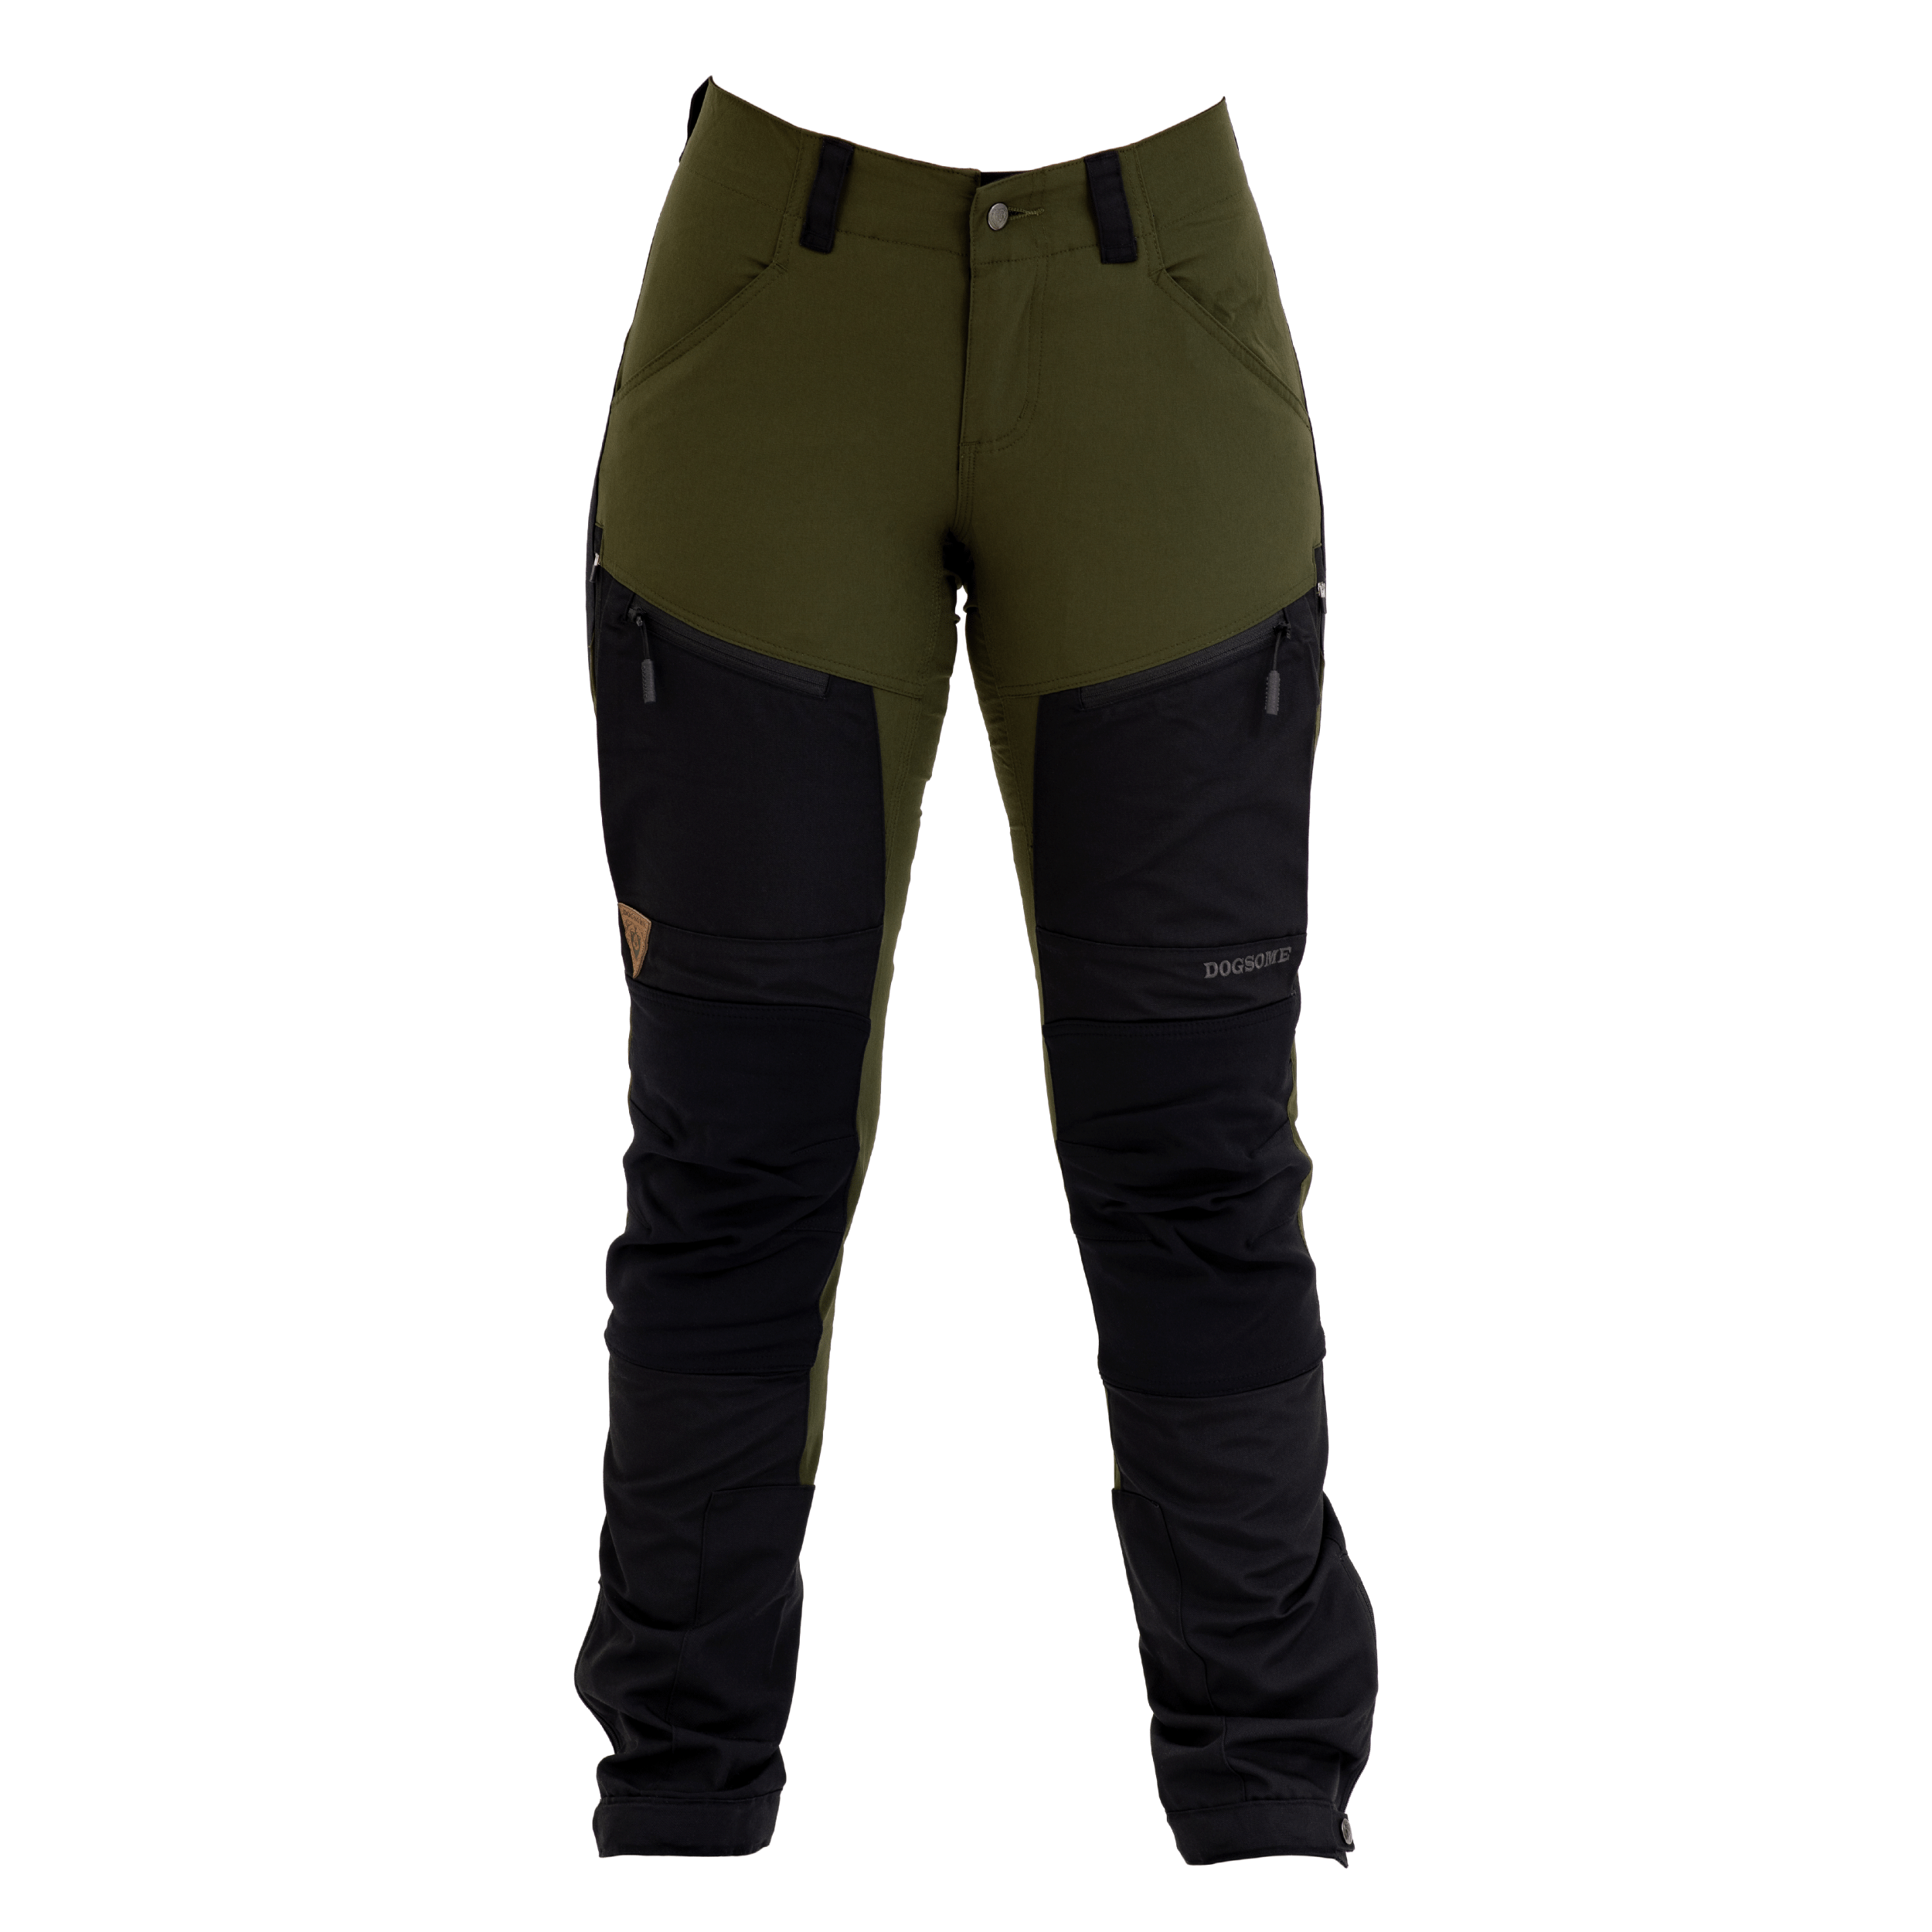 Dogsome All Year Off-Road Performance Turbukse Dame - M-38 , Oliven